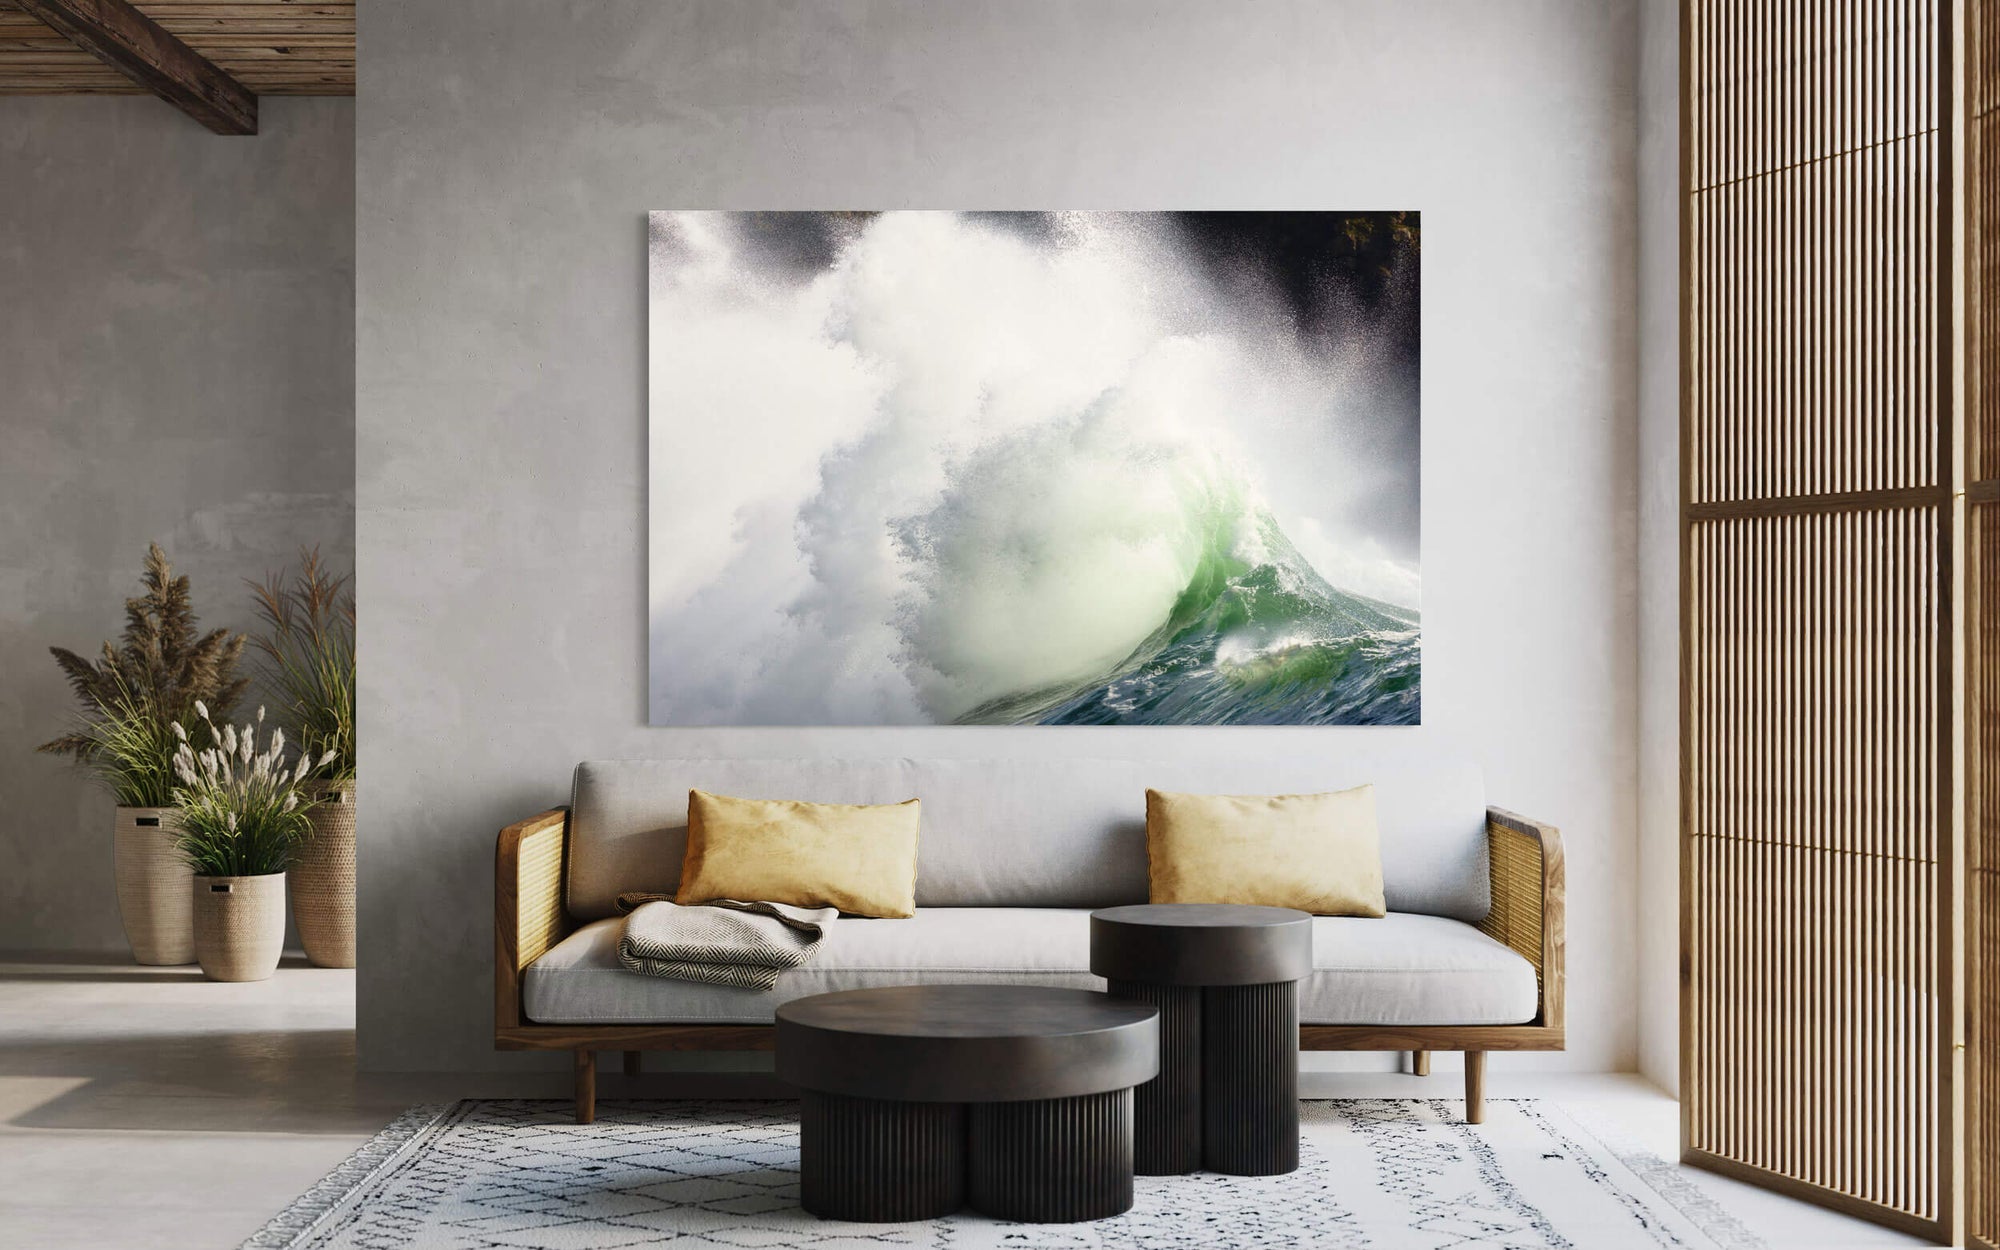 A piece of Washington art showing the waves at Cape Disappointment hangs in a living room.